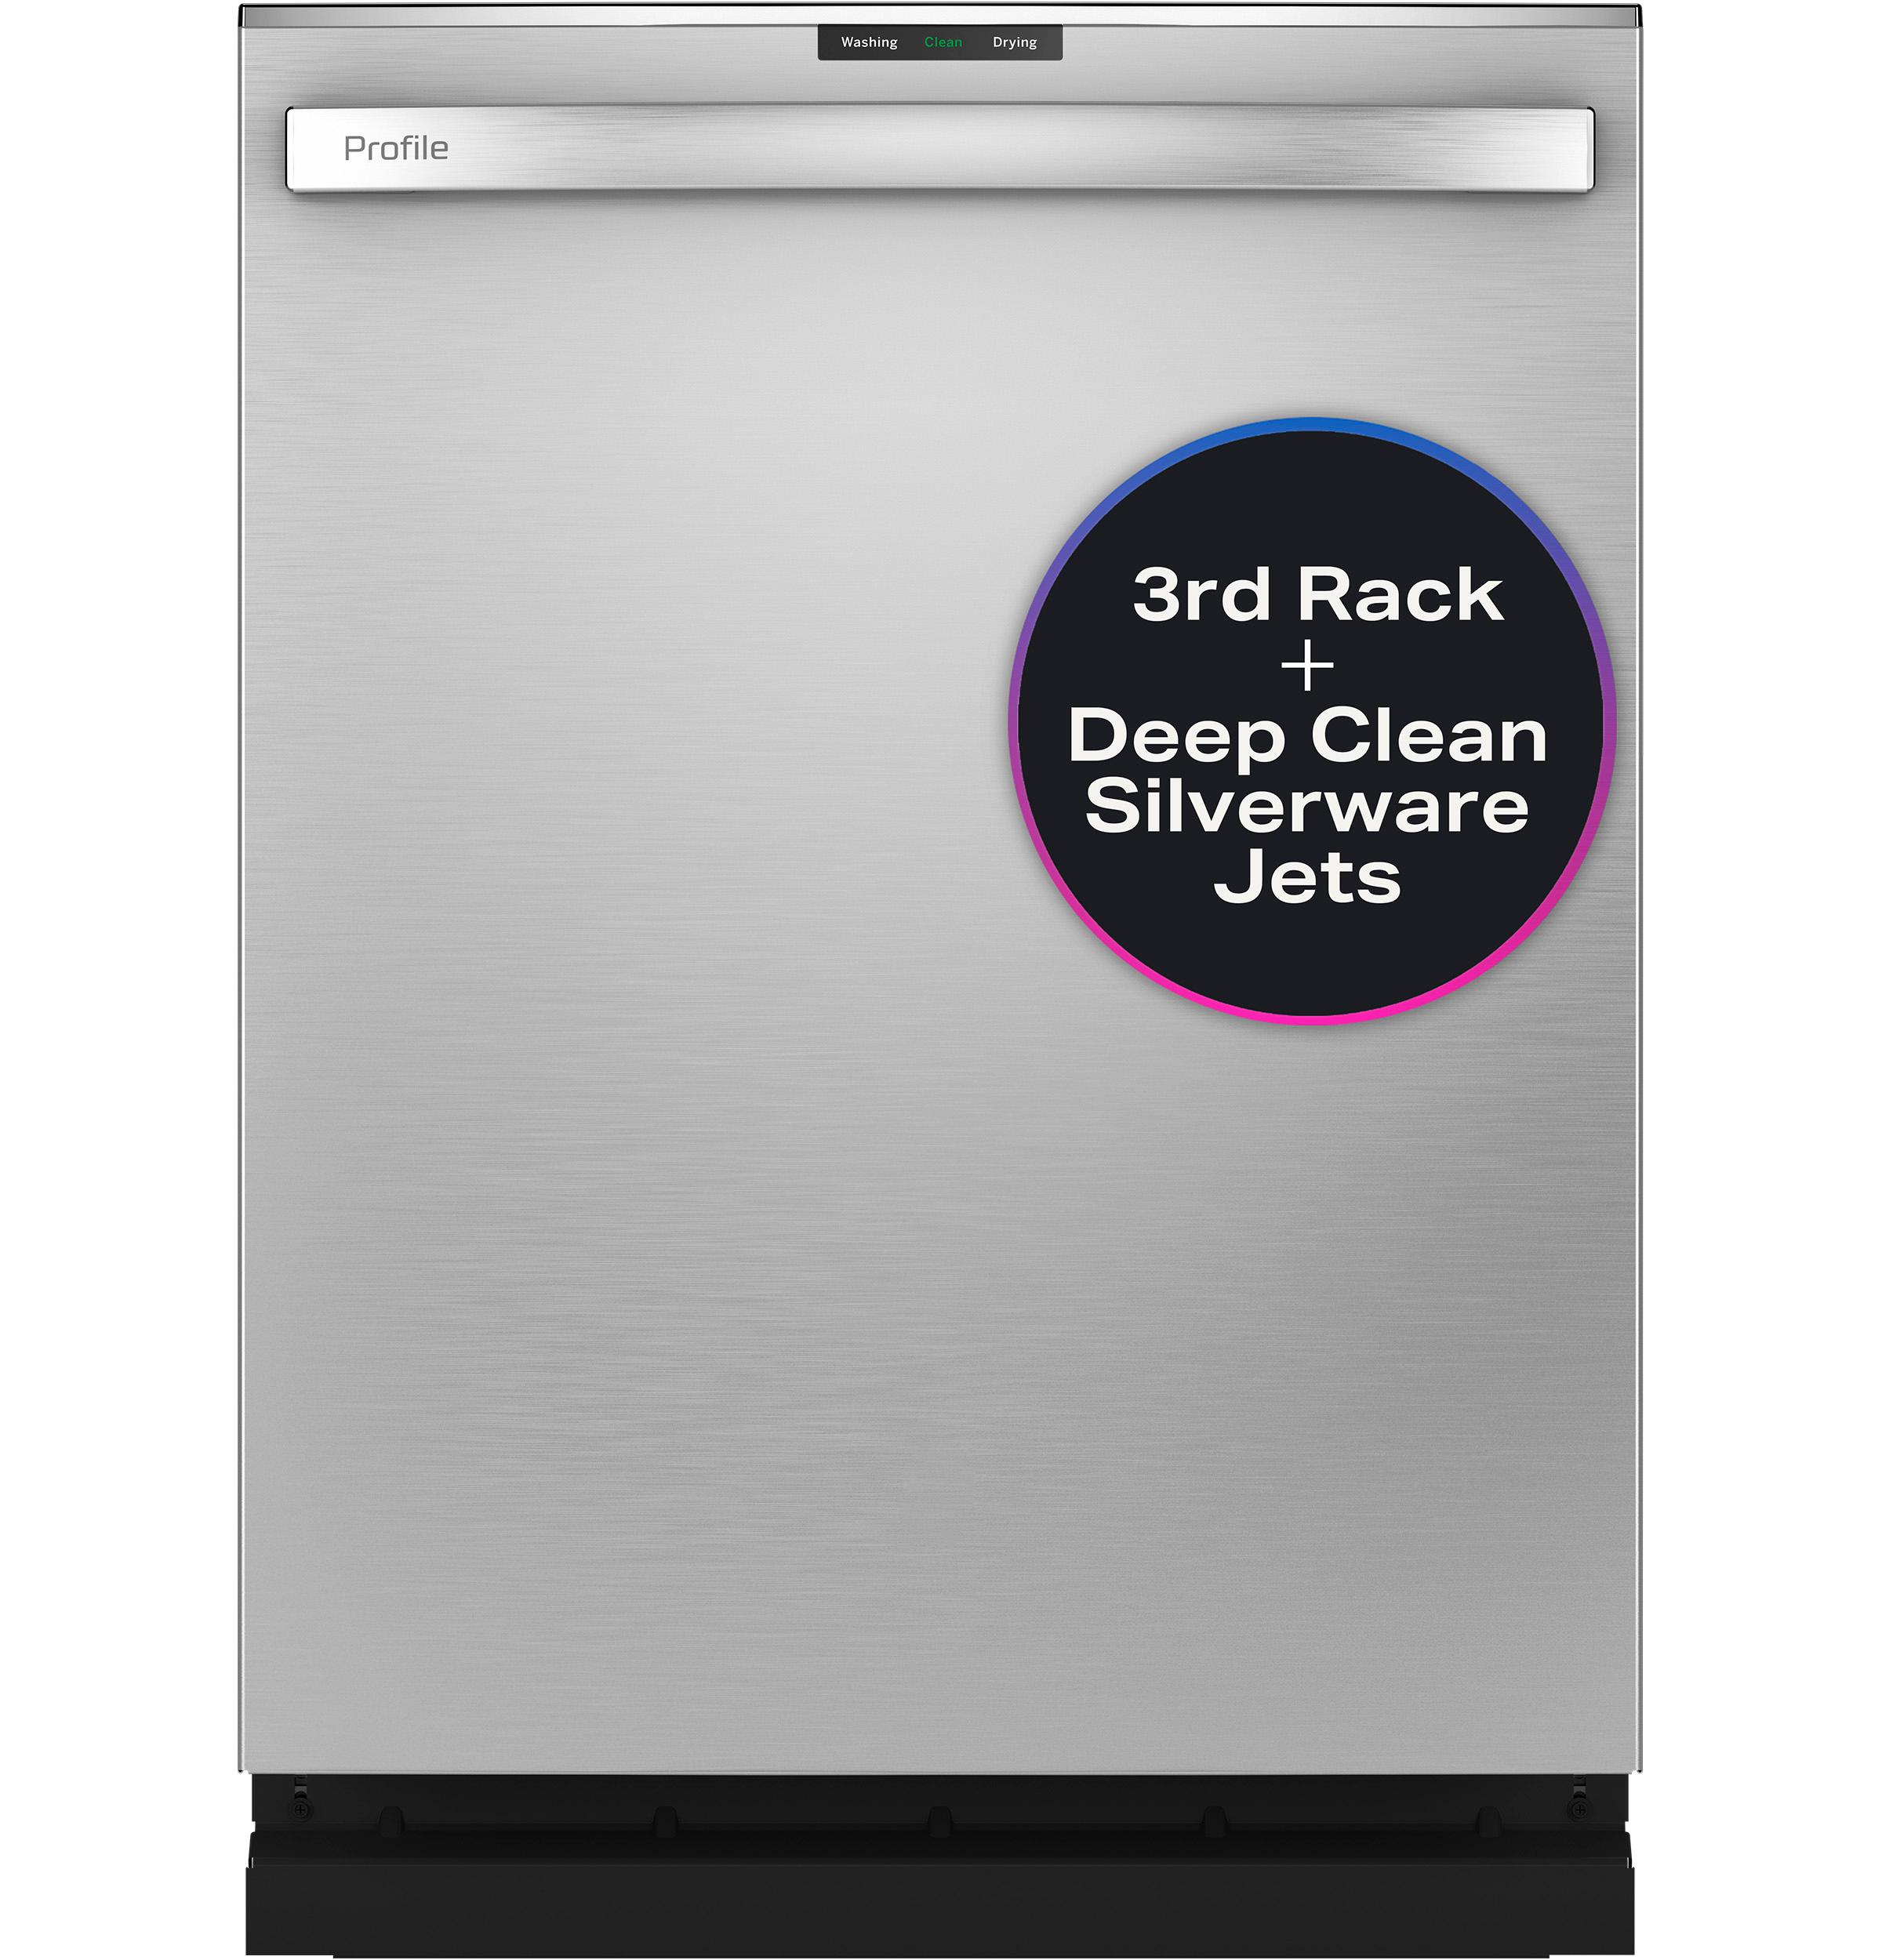 GE Profile™ Fingerprint Resistant Top Control with Stainless Steel Interior Dishwasher with Sanitize Cycle & Dry Boost with Fan Assist